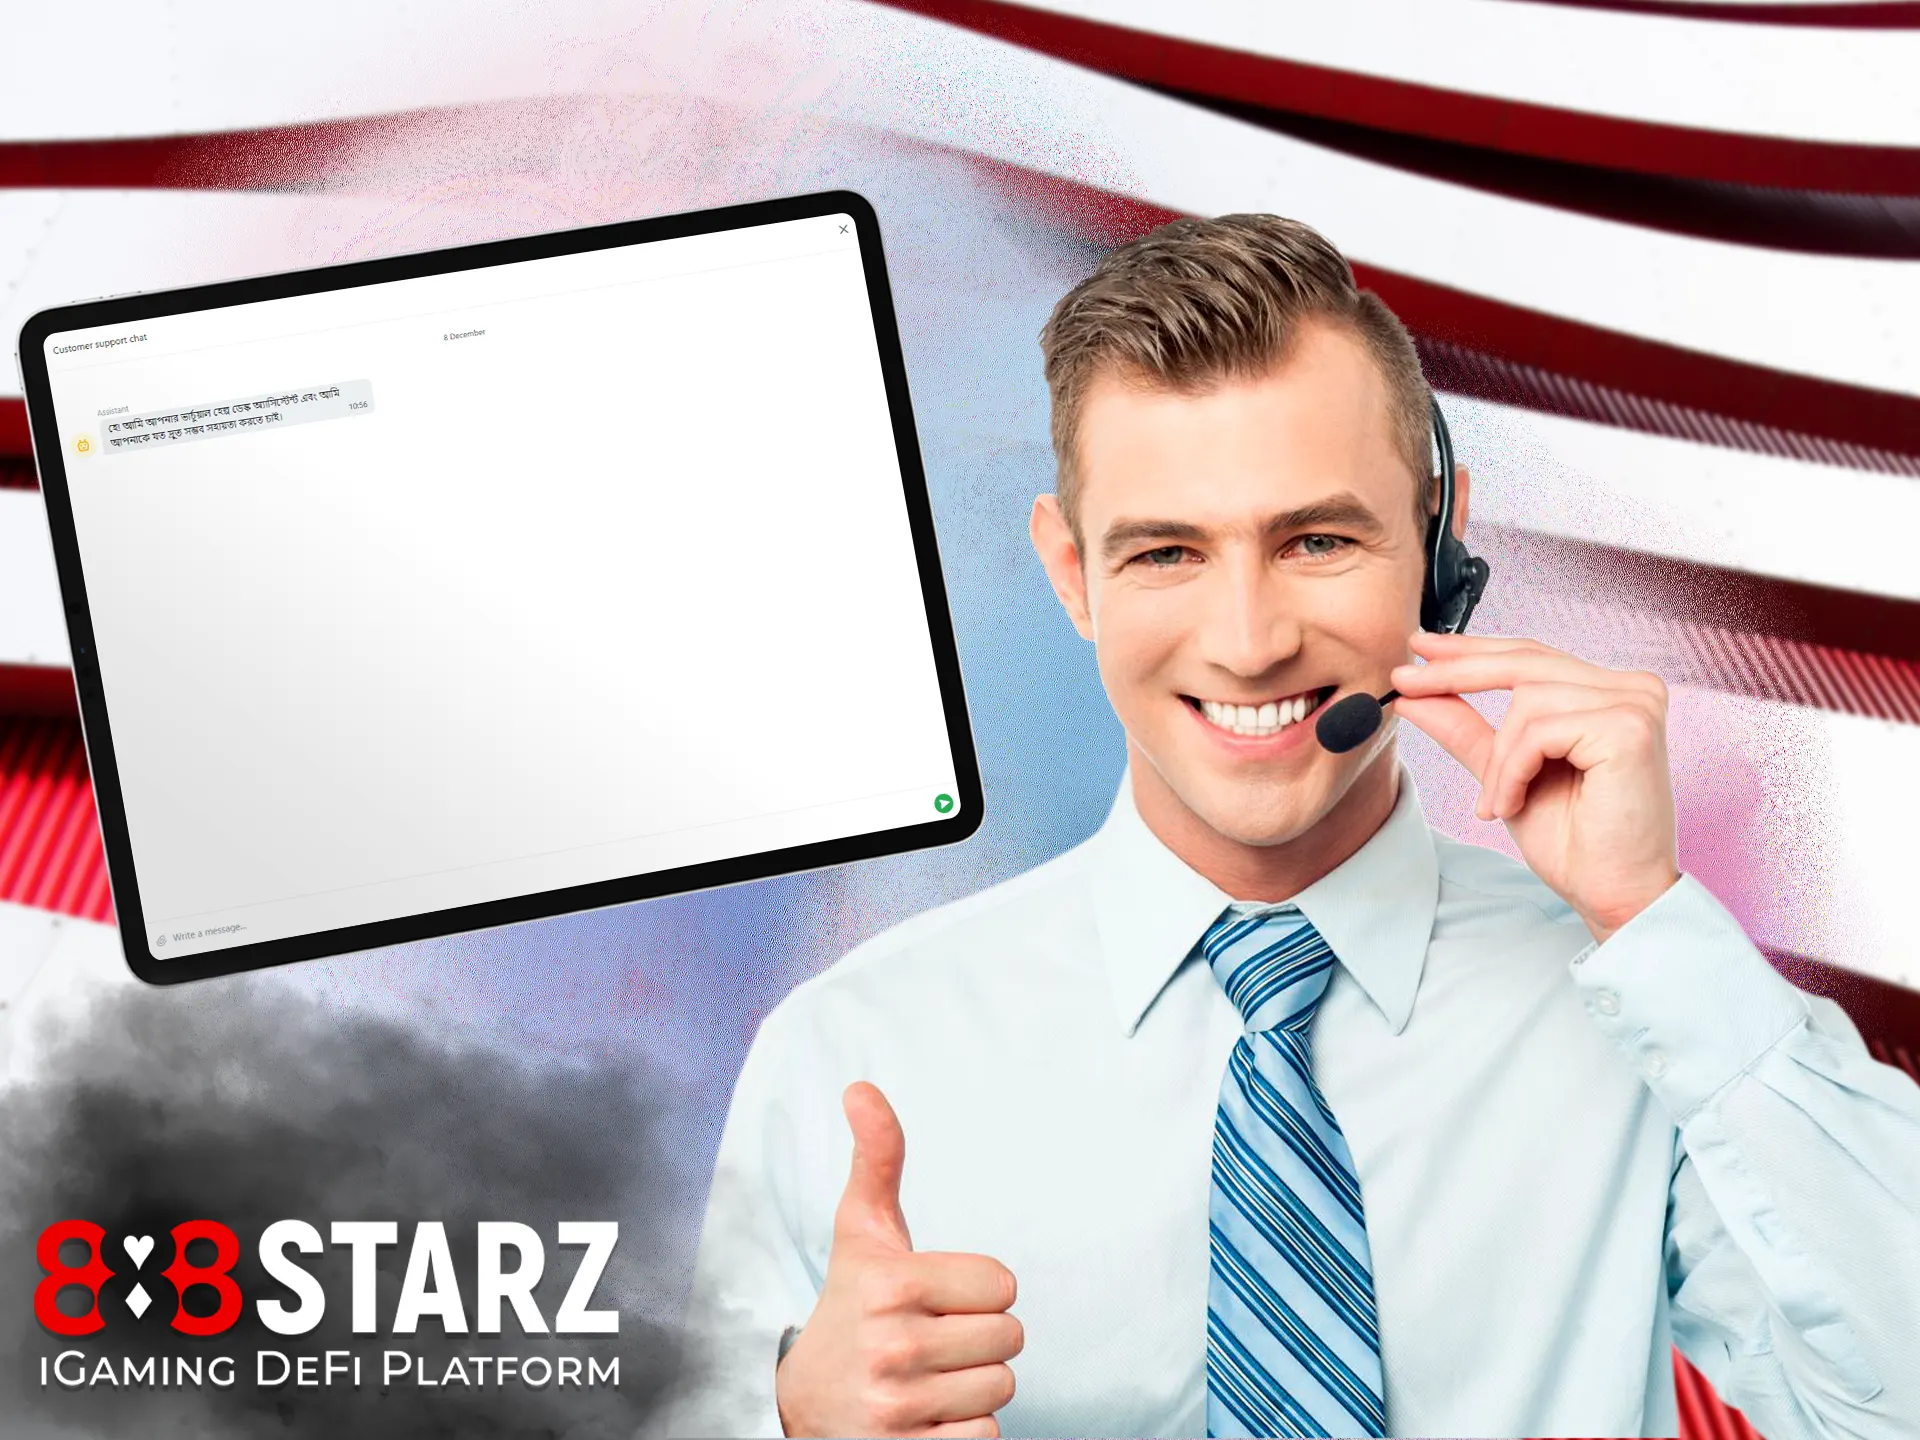 If a user has a problem, you need to contact the special chat room, where you will help professionals 888starz.